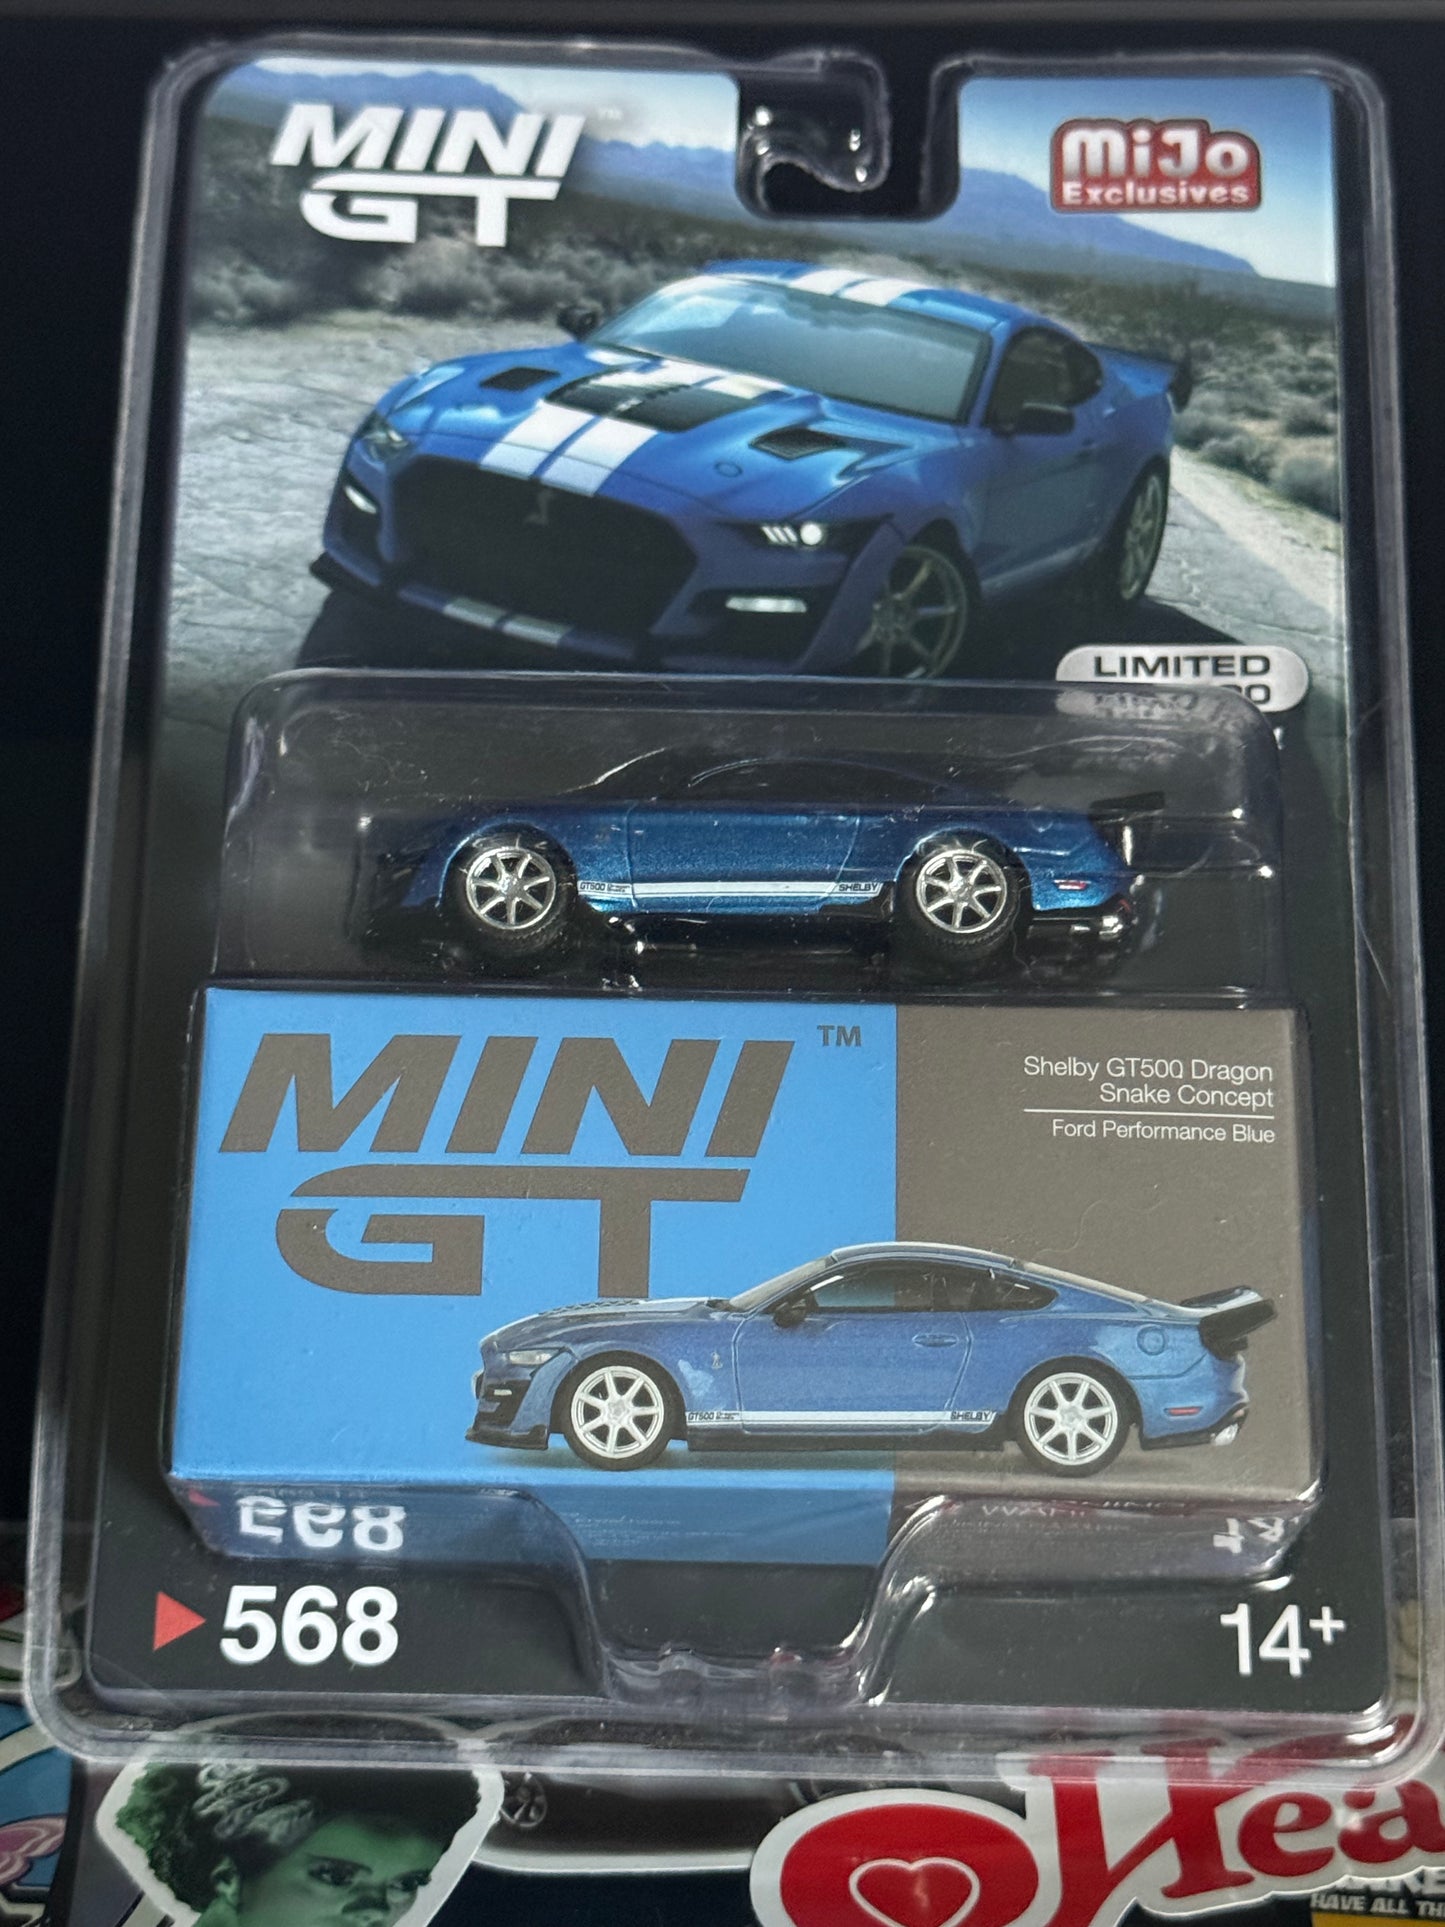 Mini GT TSM Model 1:64 Shelby GT500 Dragon Snake Concept #568 Ford Performance Blue MiJo Exclusives